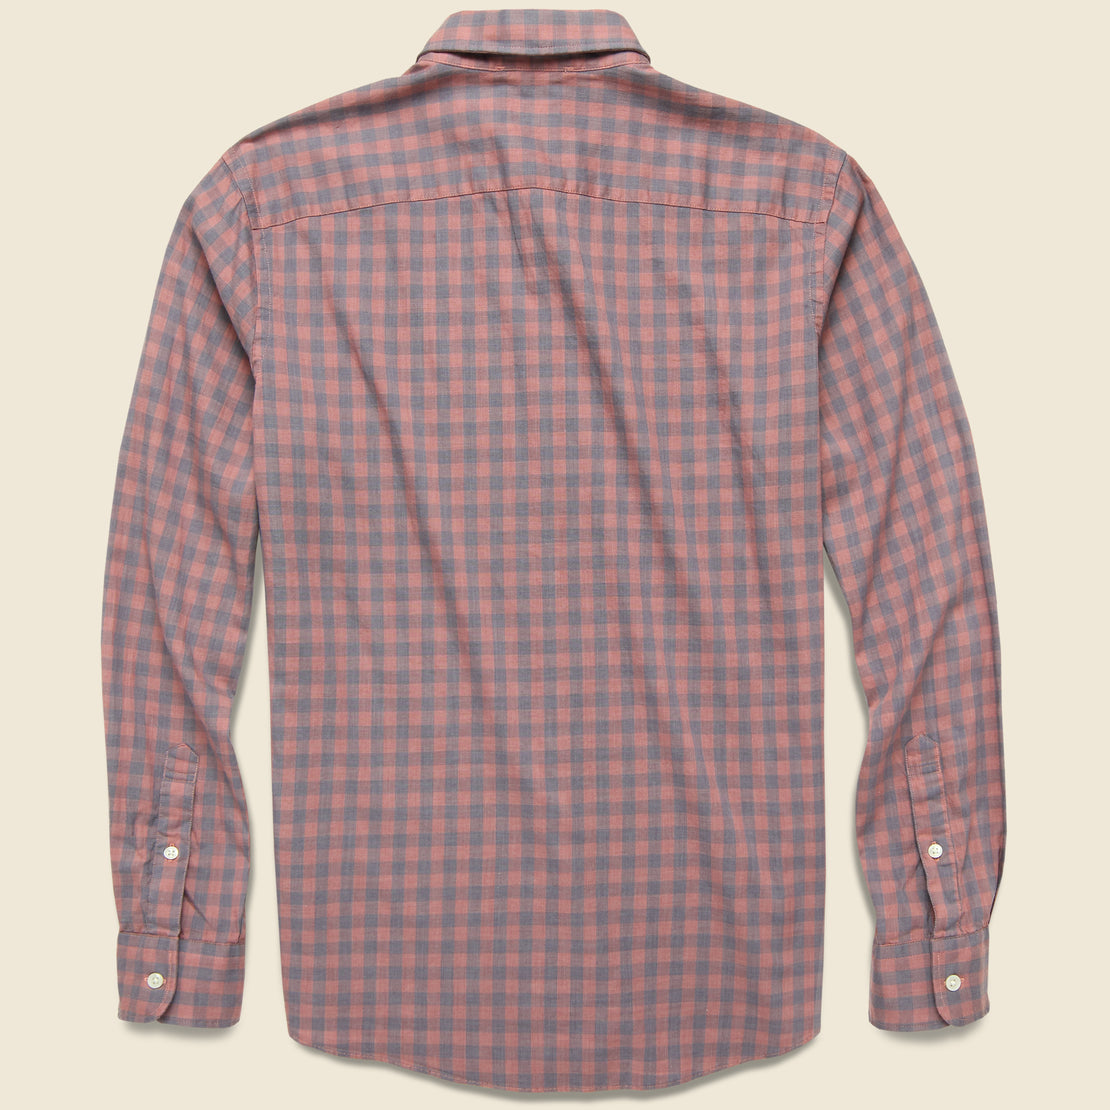 Movement Shirt - Barn Red Gingham - Faherty - STAG Provisions - Tops - L/S Woven - Plaid